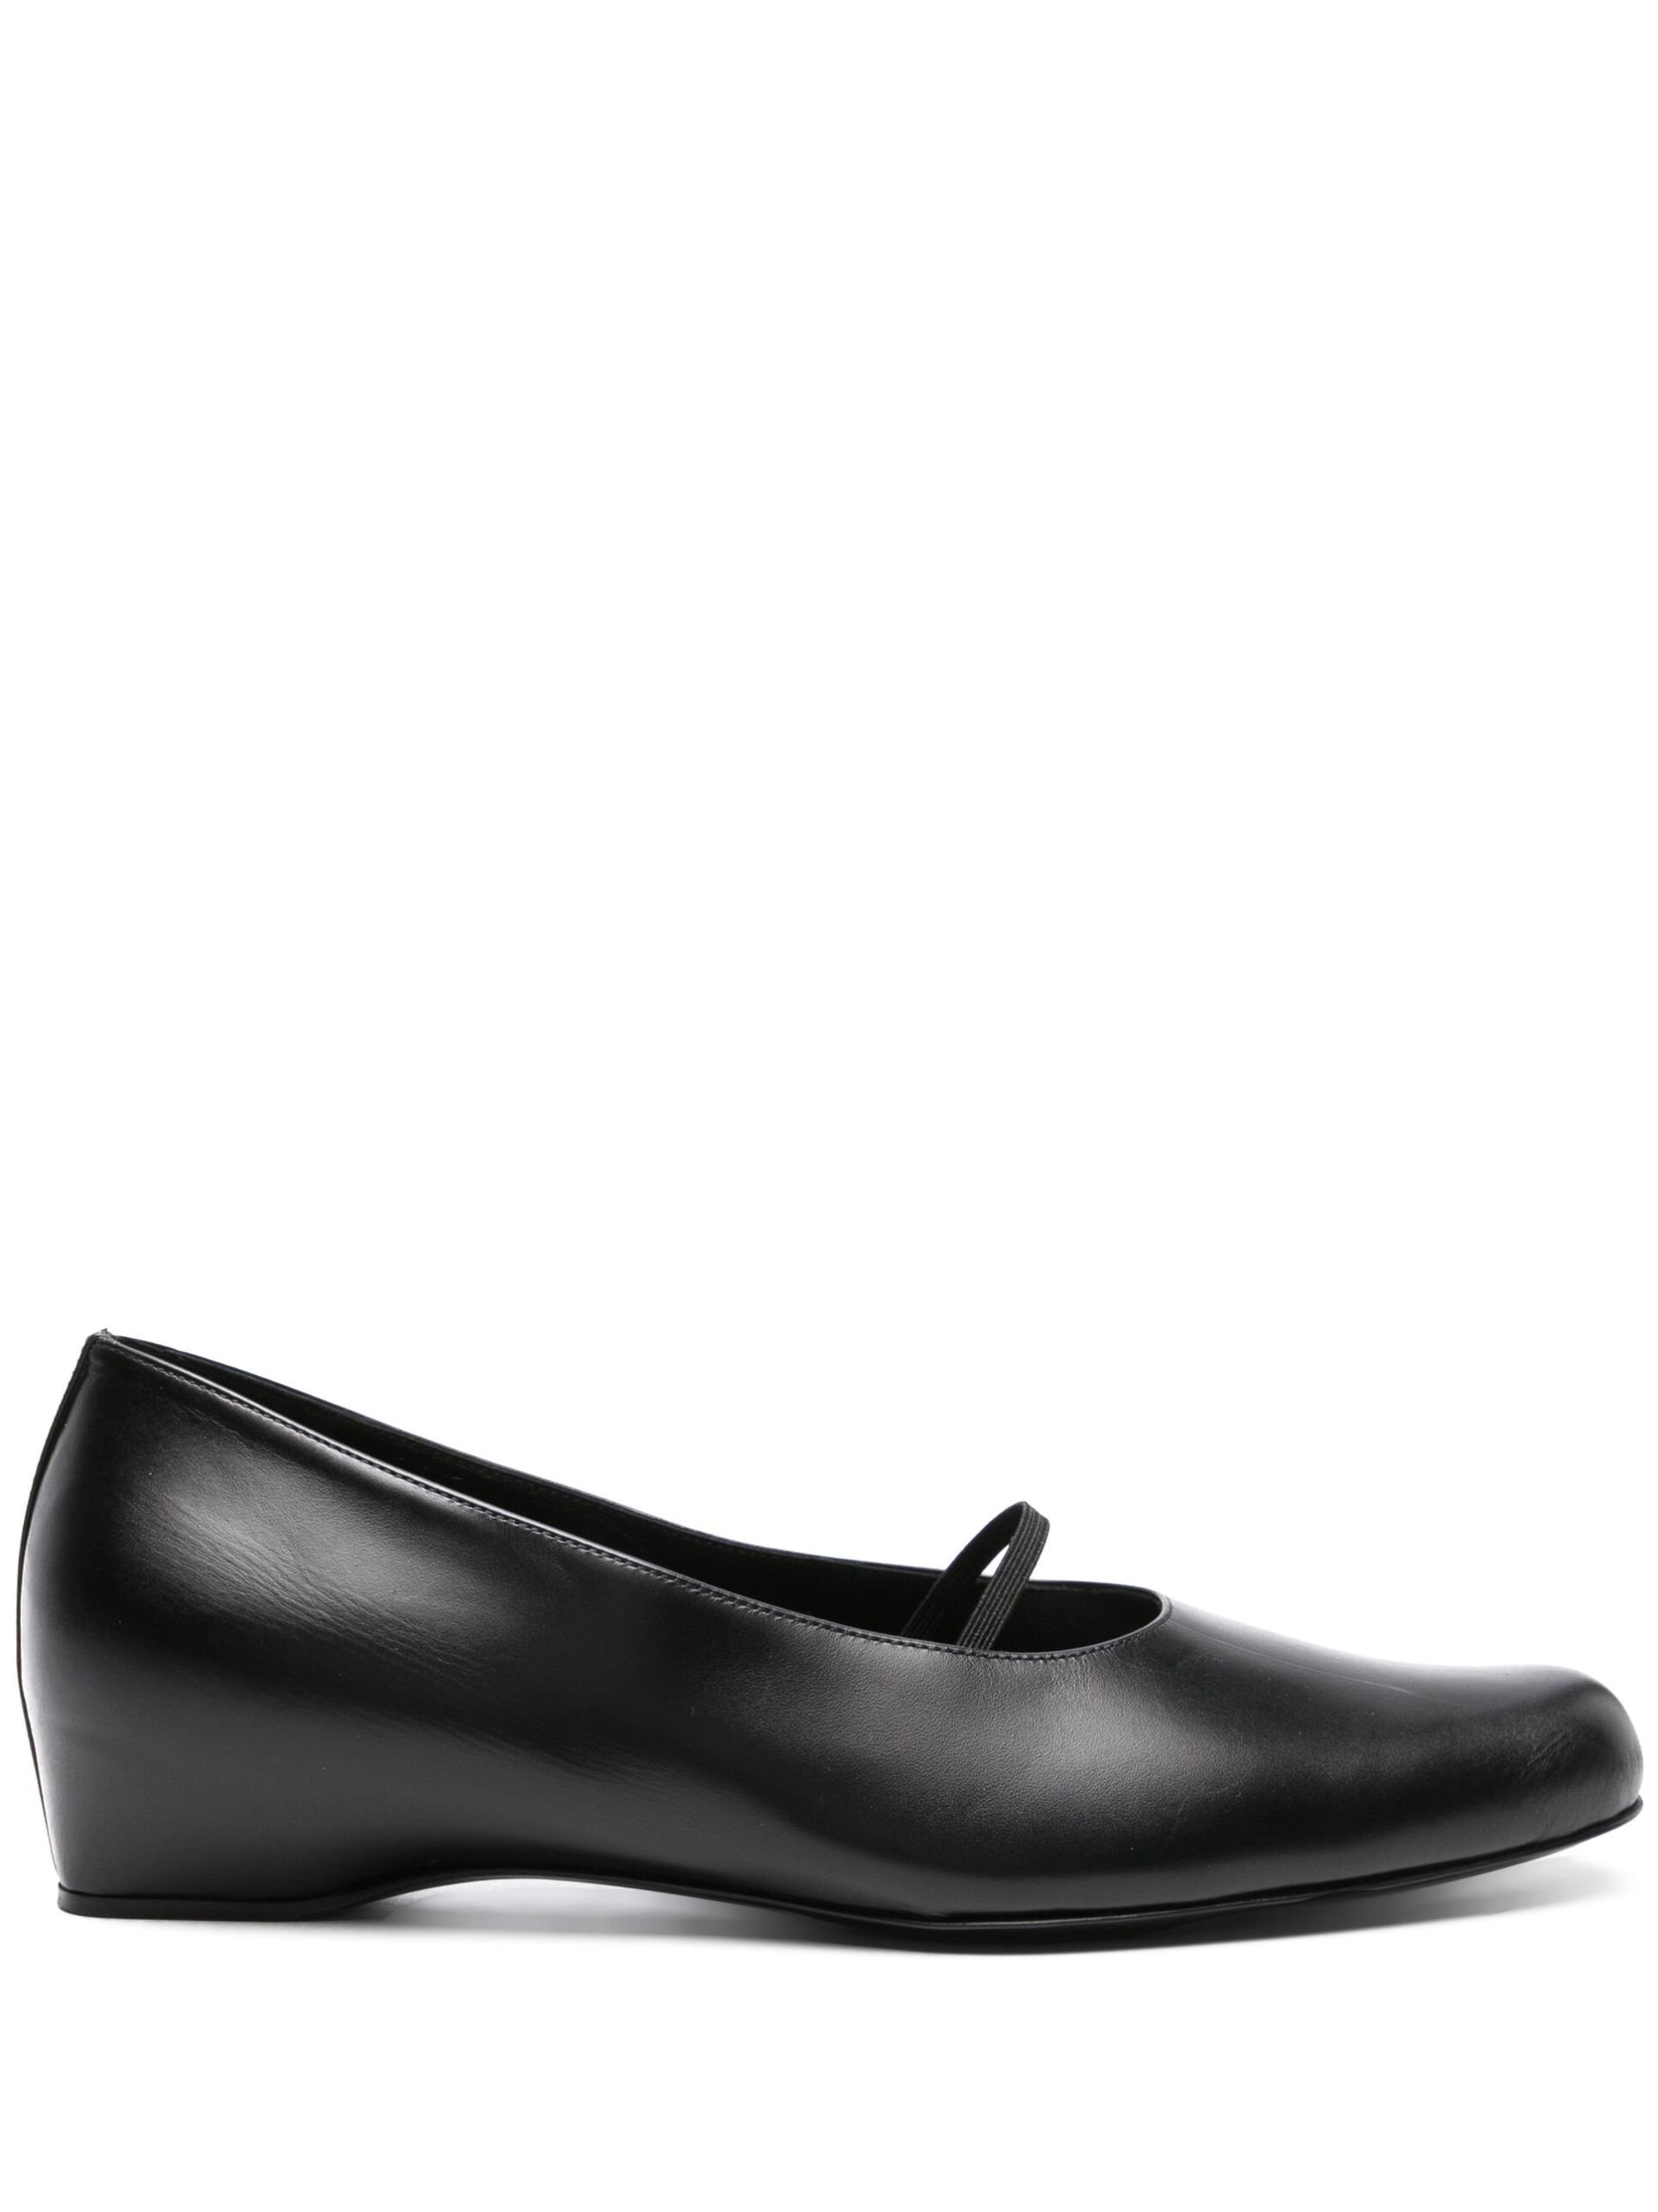 Black Marion Leather Ballerina Shoes - 1